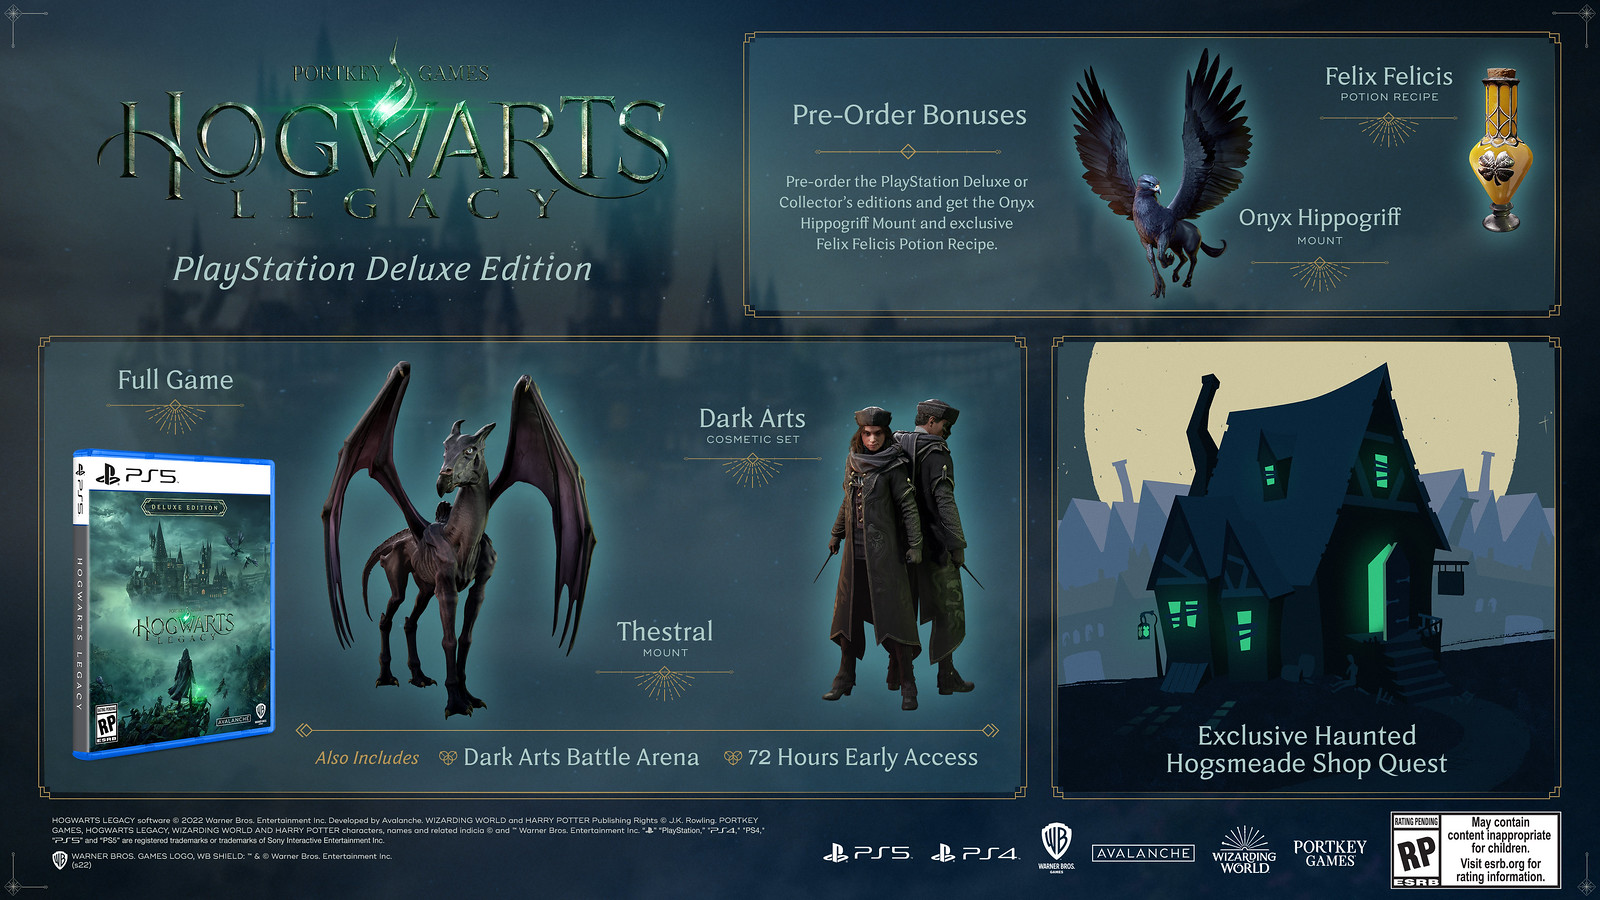 The PlayStation Deluxe Edition includes the full game, Thestral Mount and Dark Arts Cosmetic Set, plus the Dark Arts Battle Arena and 72-hour early access.  Pre-ordering gets you the Onyx Hippogryph mount and the exclusive Felix Felicis potion recipe.  You will also get the exclusive Haunted Hogsmeade Shop quest.